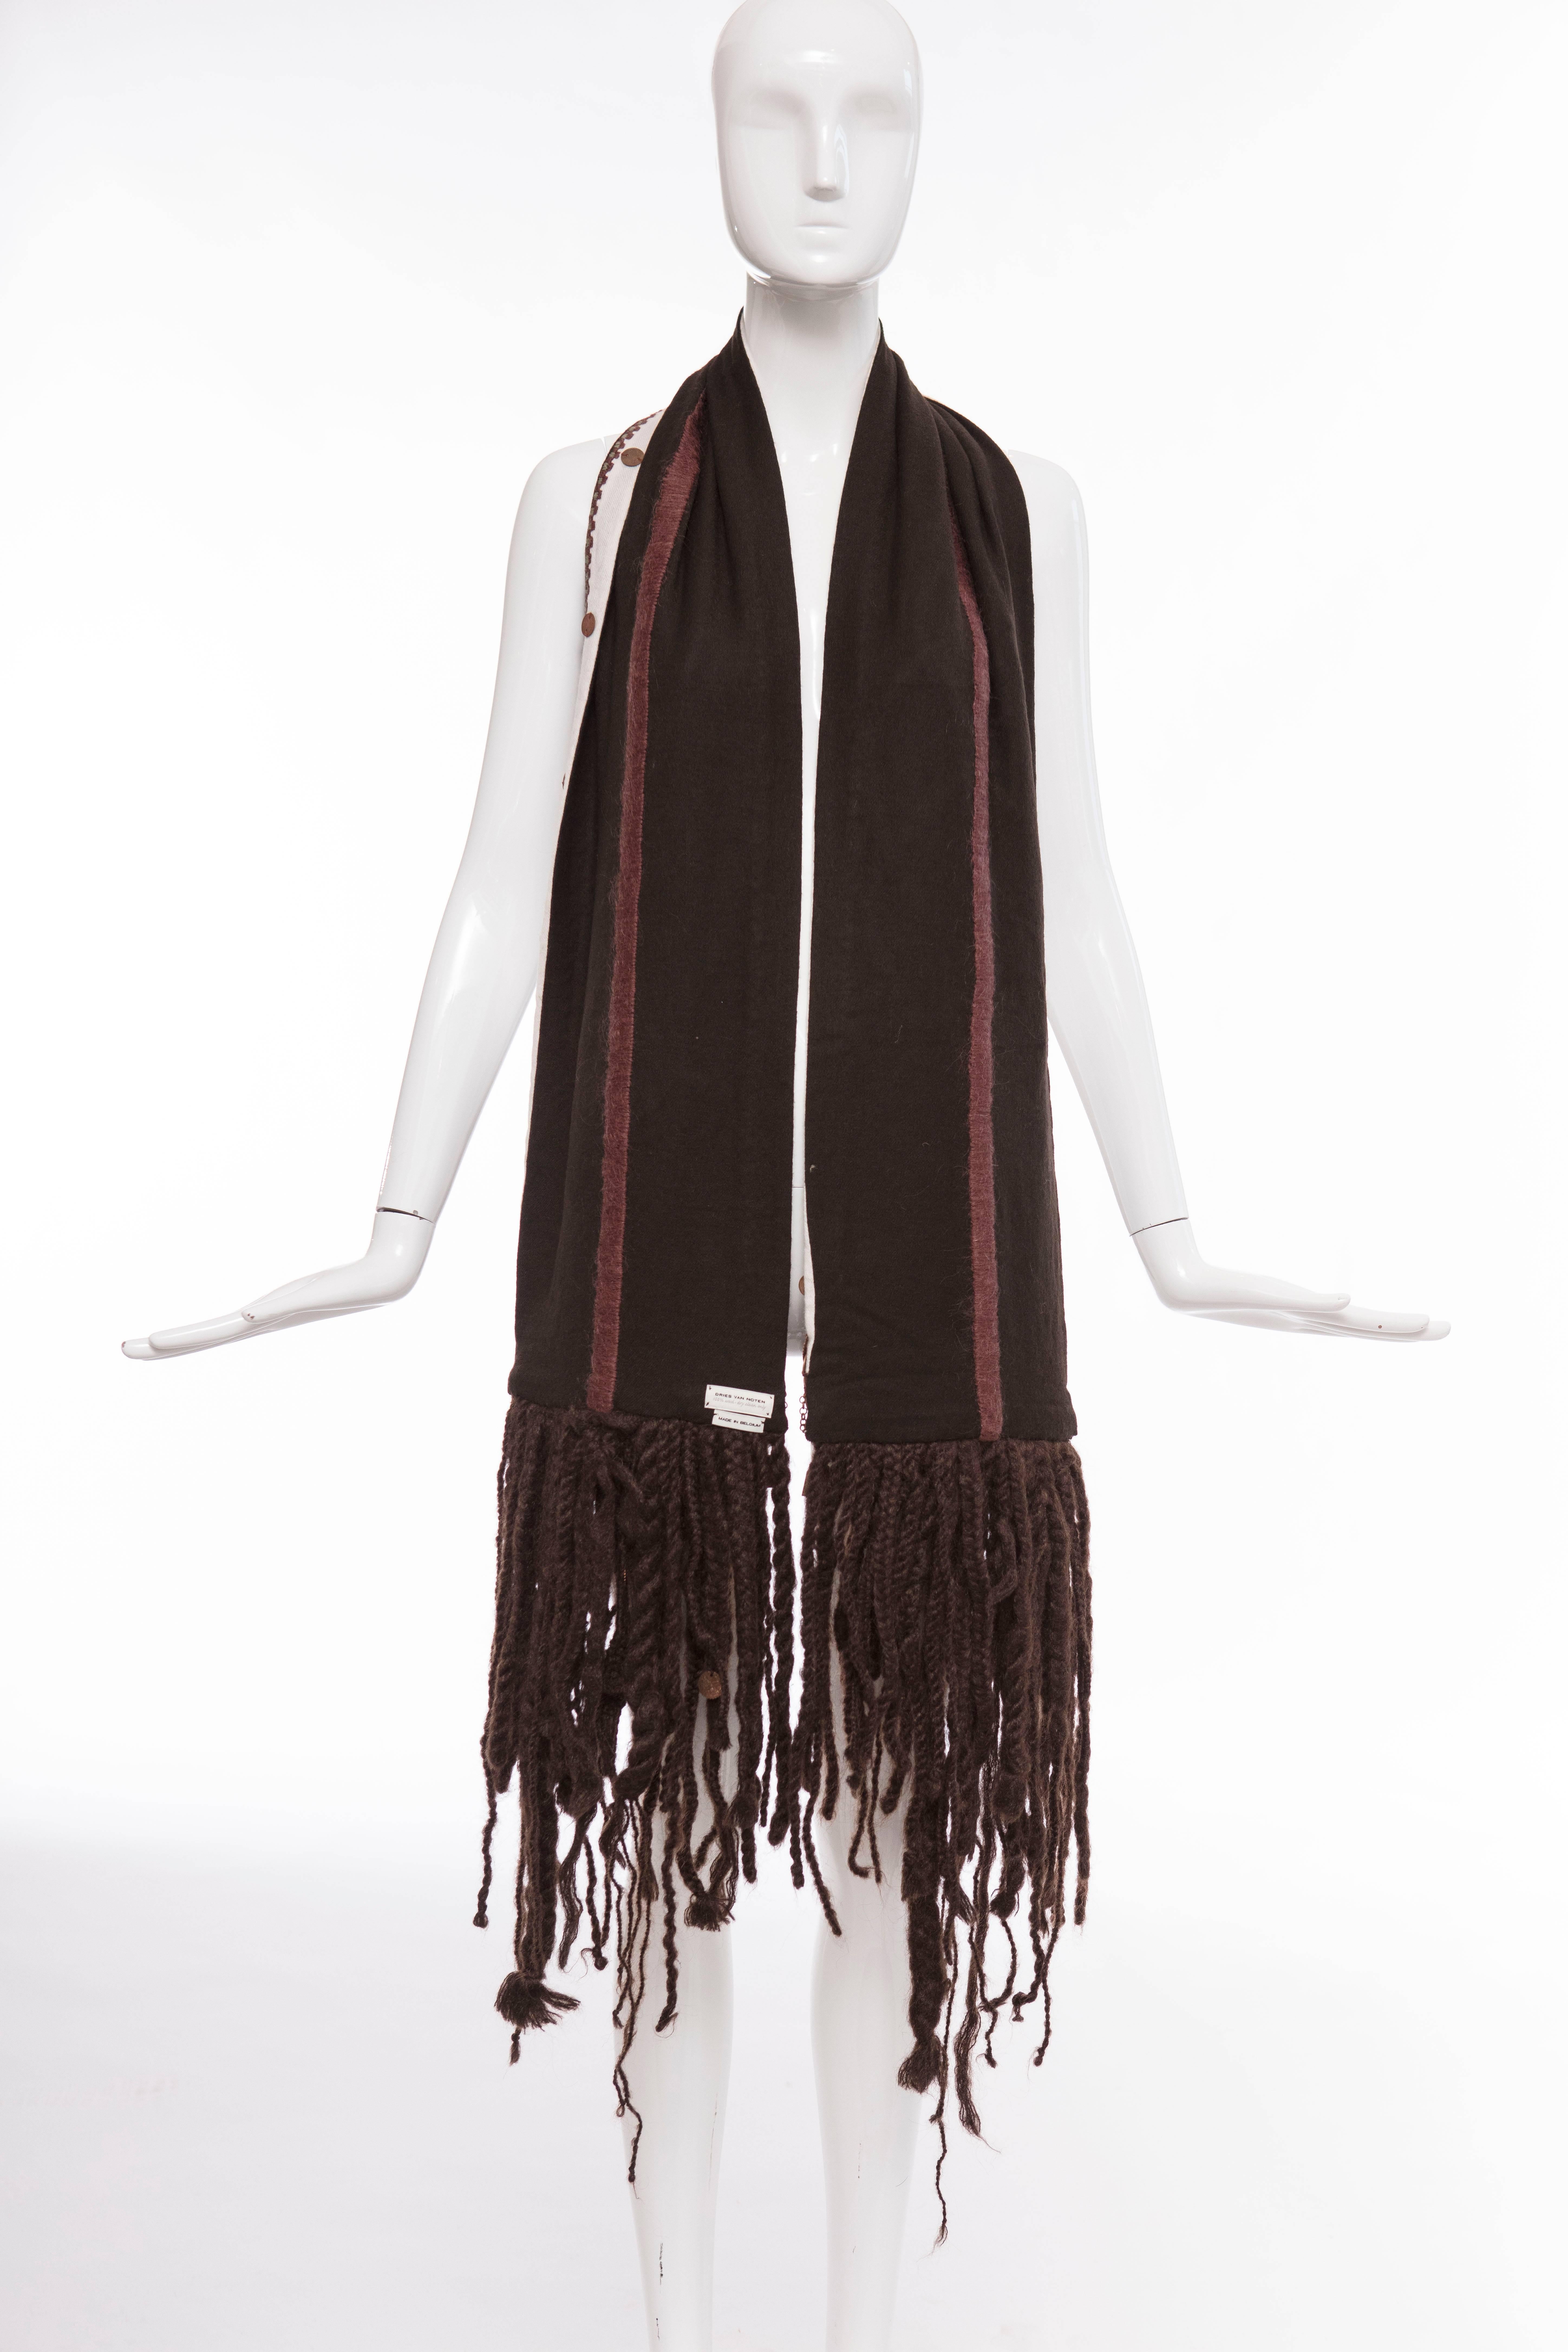 Dries Van Noten Runway Embroidered Wool Scarf Antiqued Copper-Coin, Fall 2002 In New Condition For Sale In Cincinnati, OH